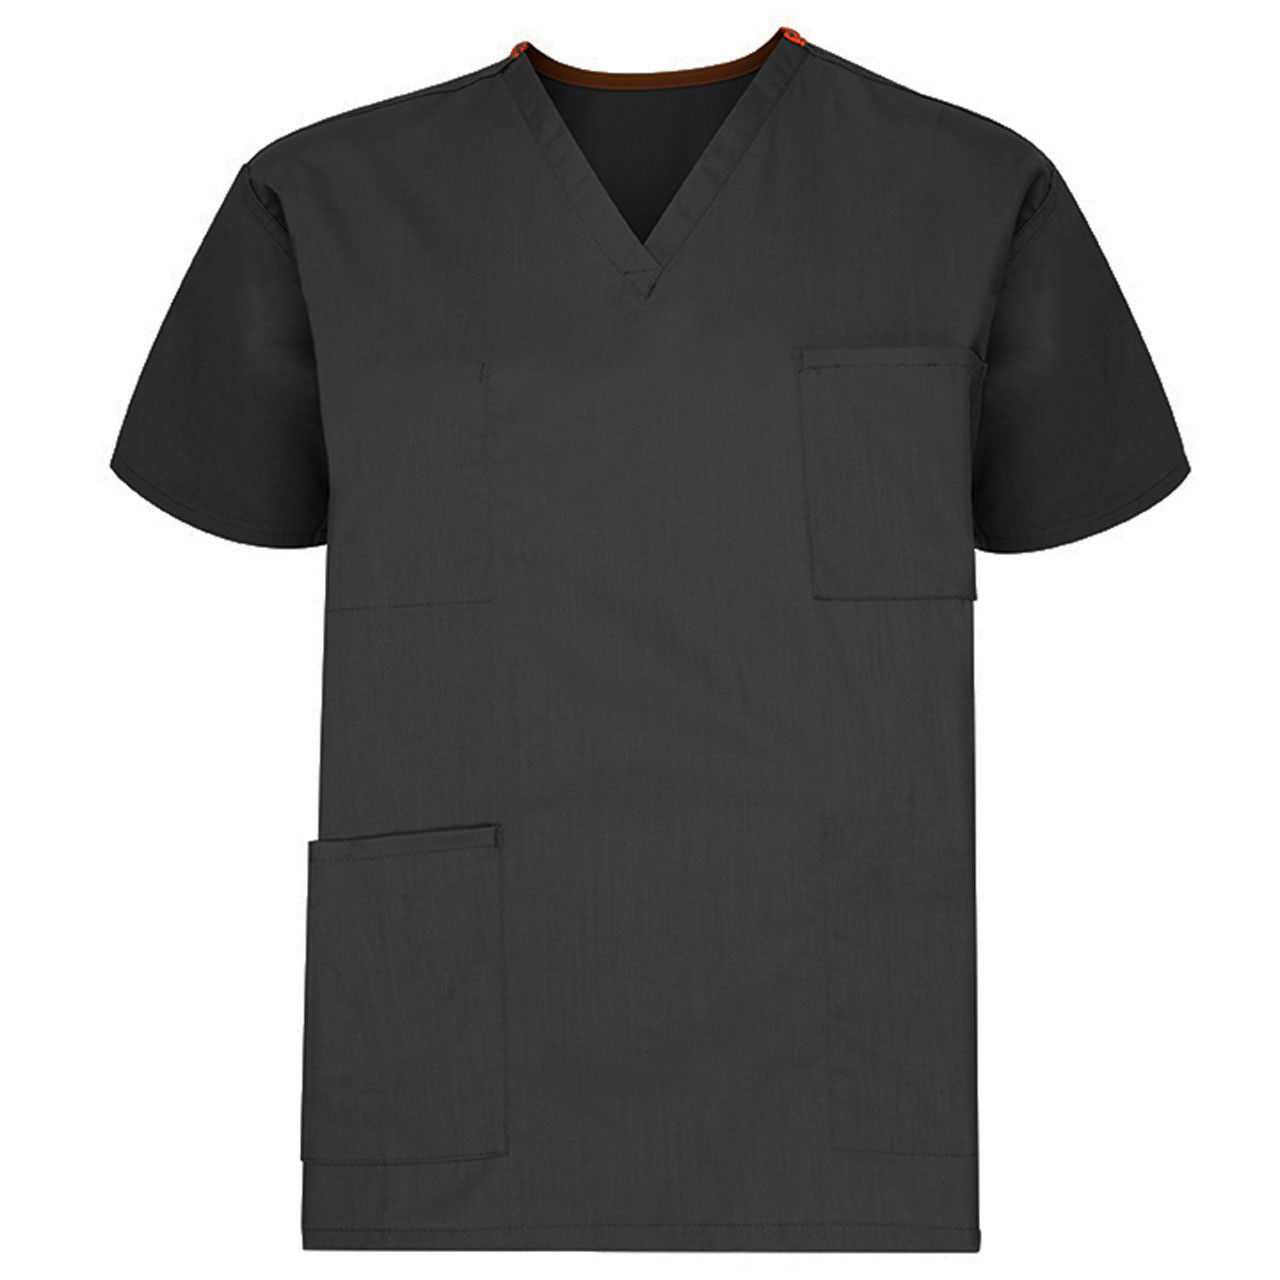 Can you specify the material used for these reversible scrubs, the Black Unisex Poplin Top?